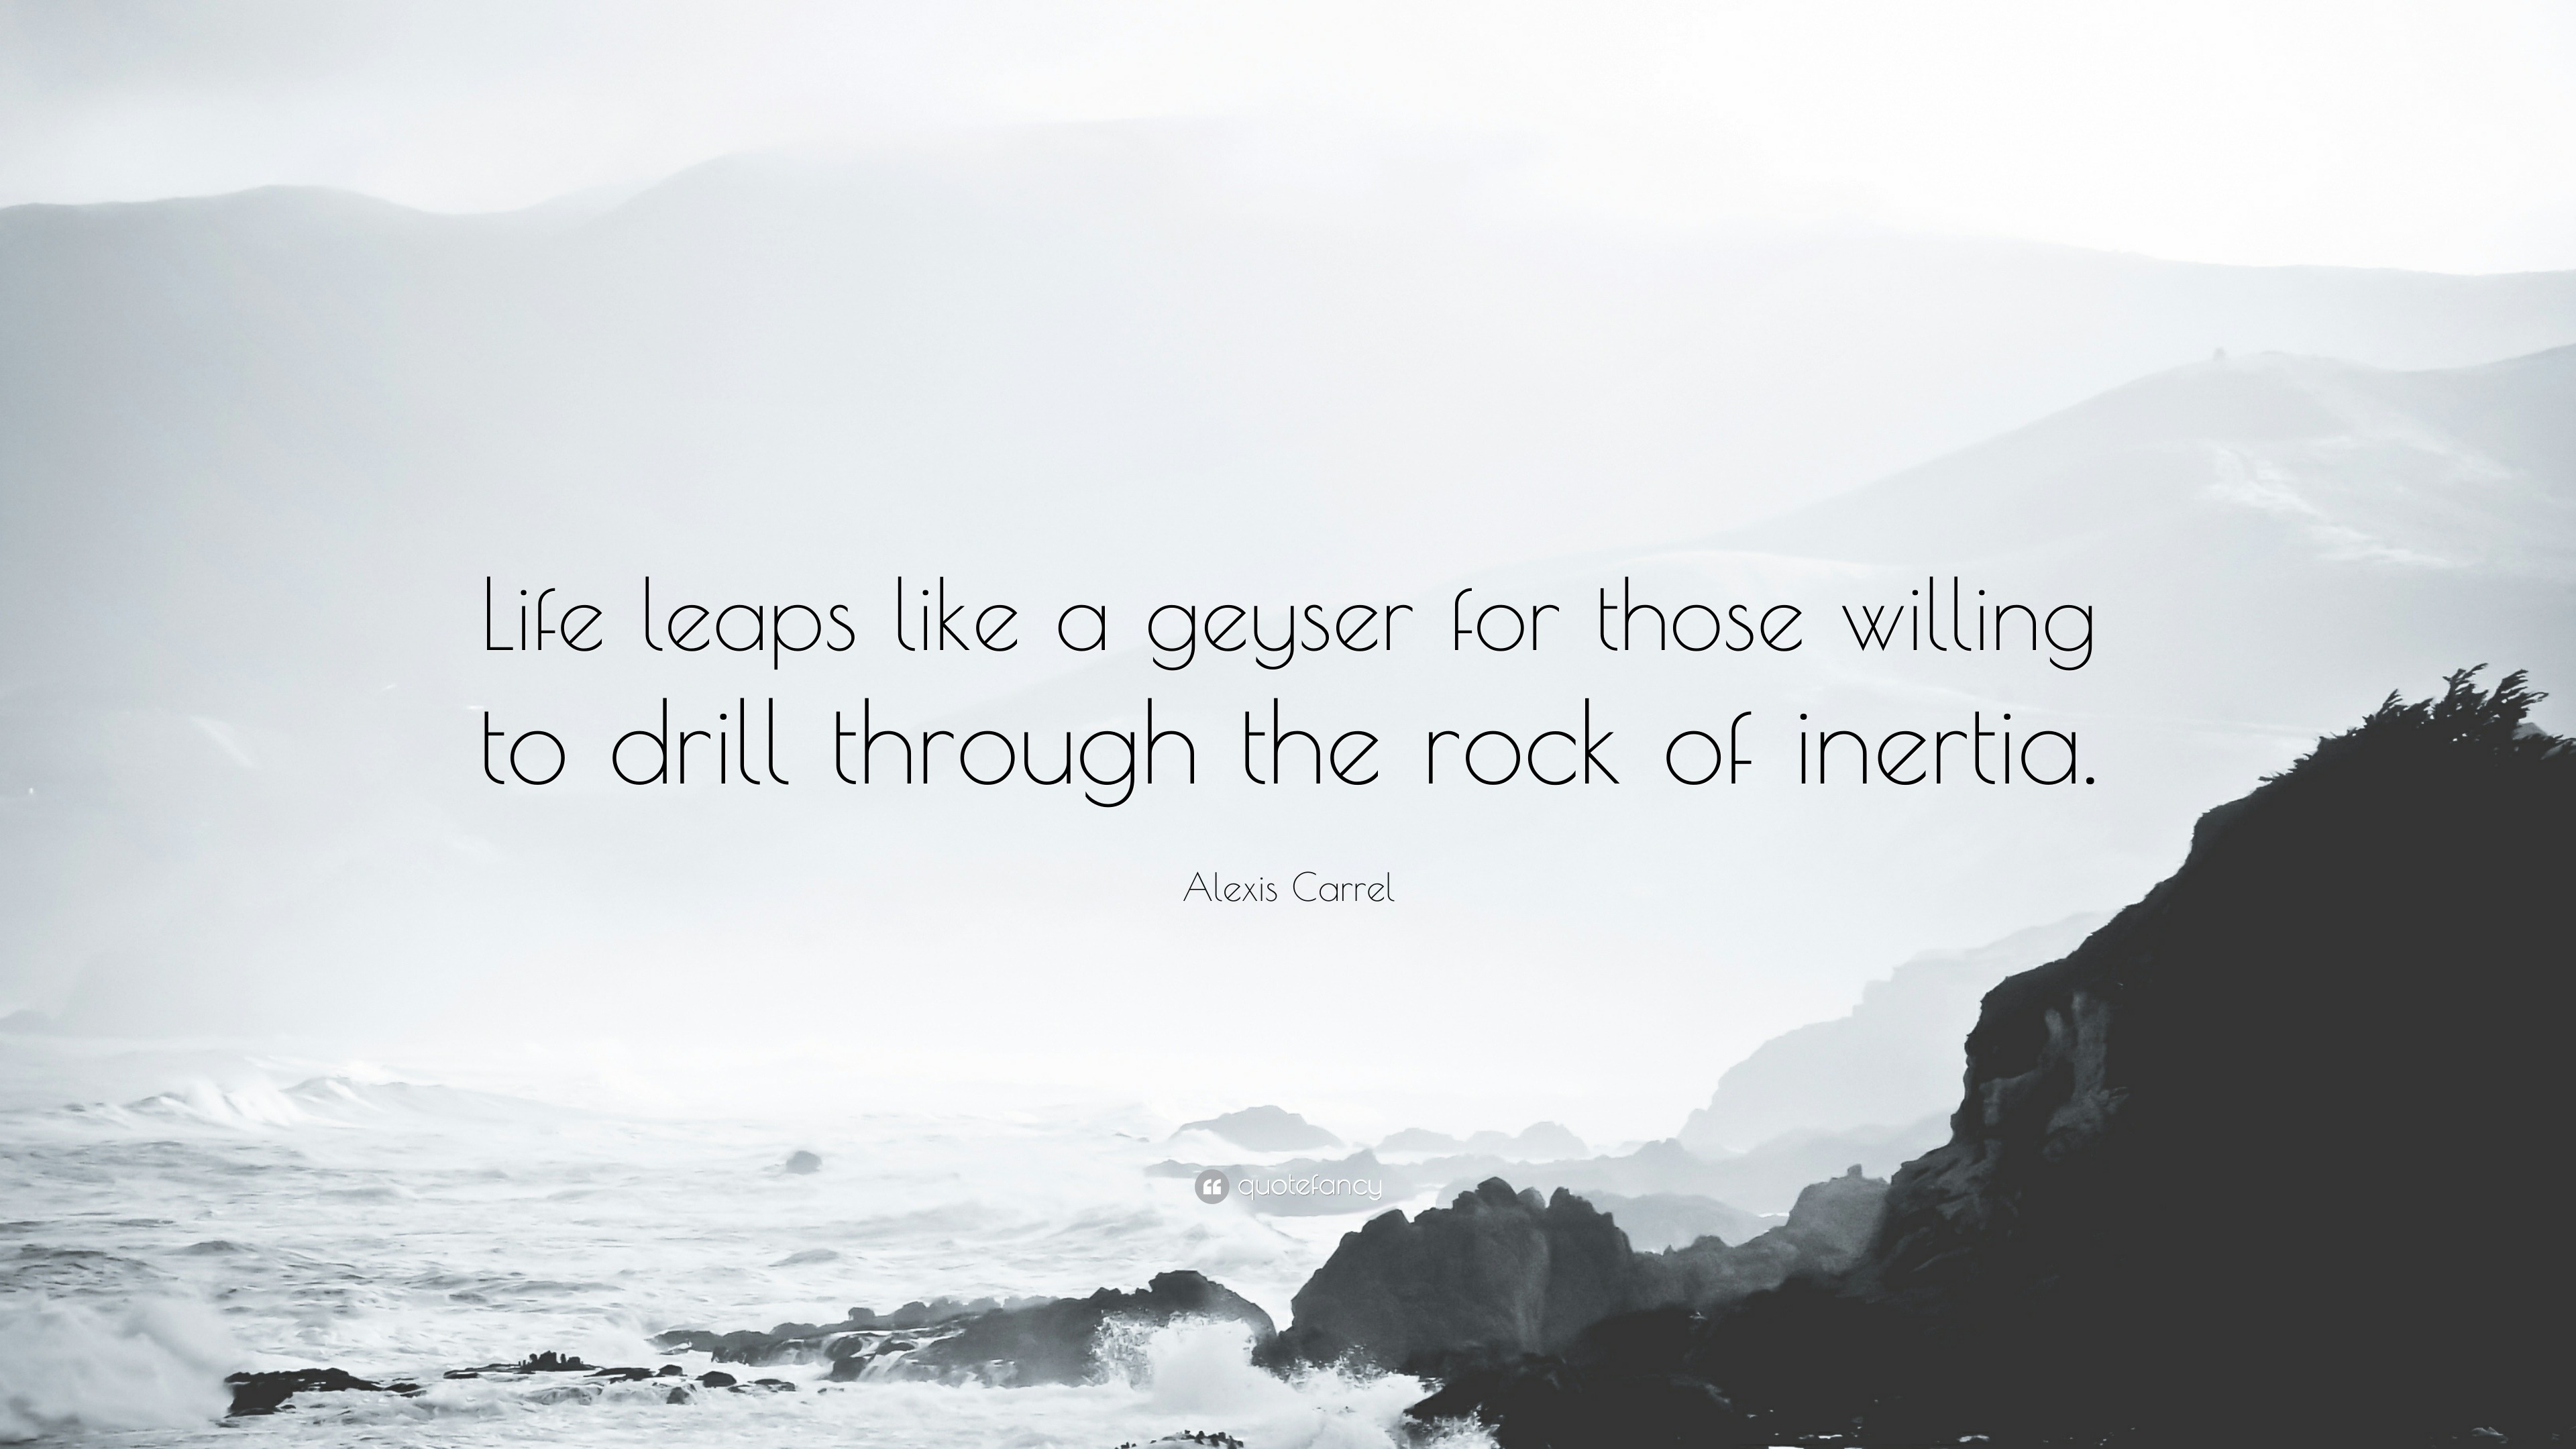 Alexis Carrel Quote “Life leaps like a geyser for those willing to drill through